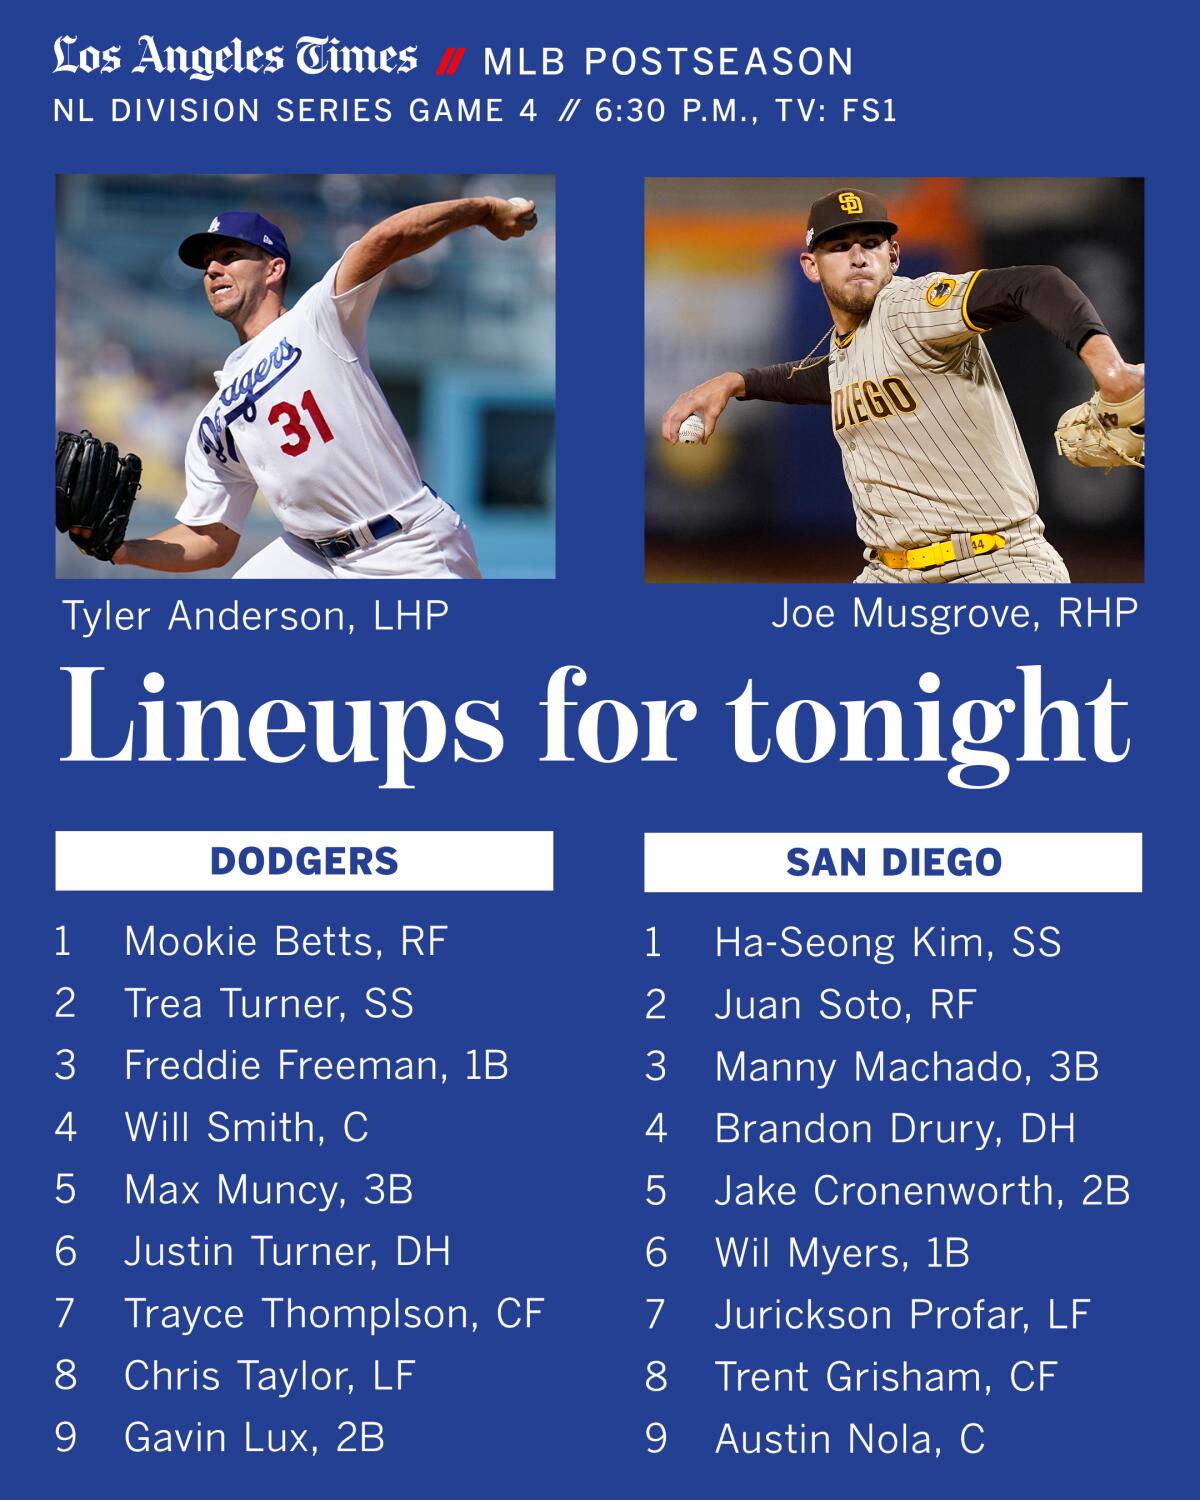 Dodgers vs. Padres in Game 4 of NLDS.